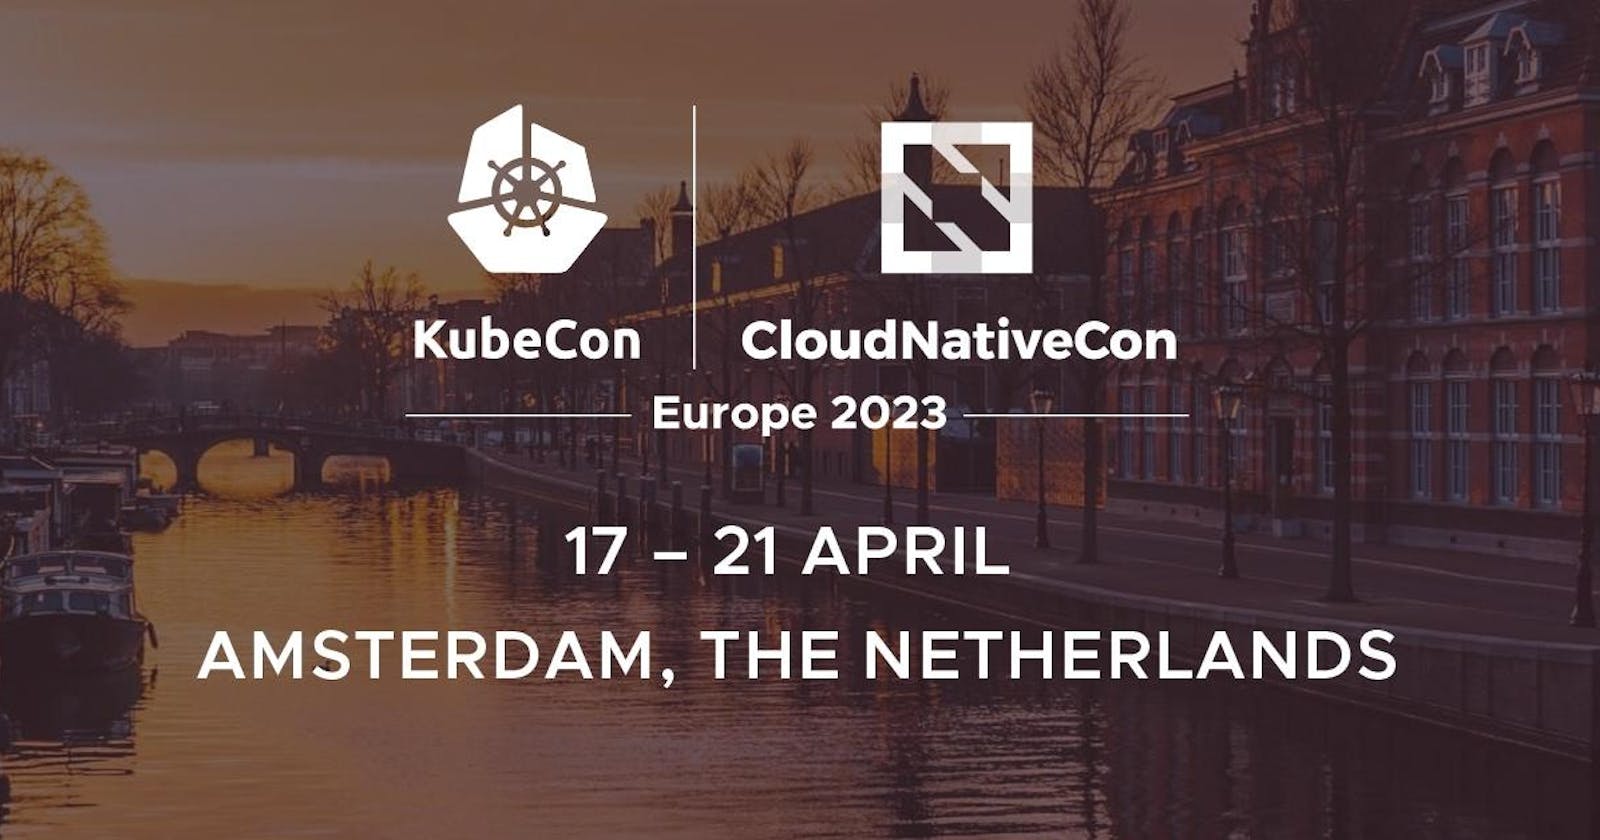 Sonia at KubeCon EU 2023: A Recap of Her First-Time Experience